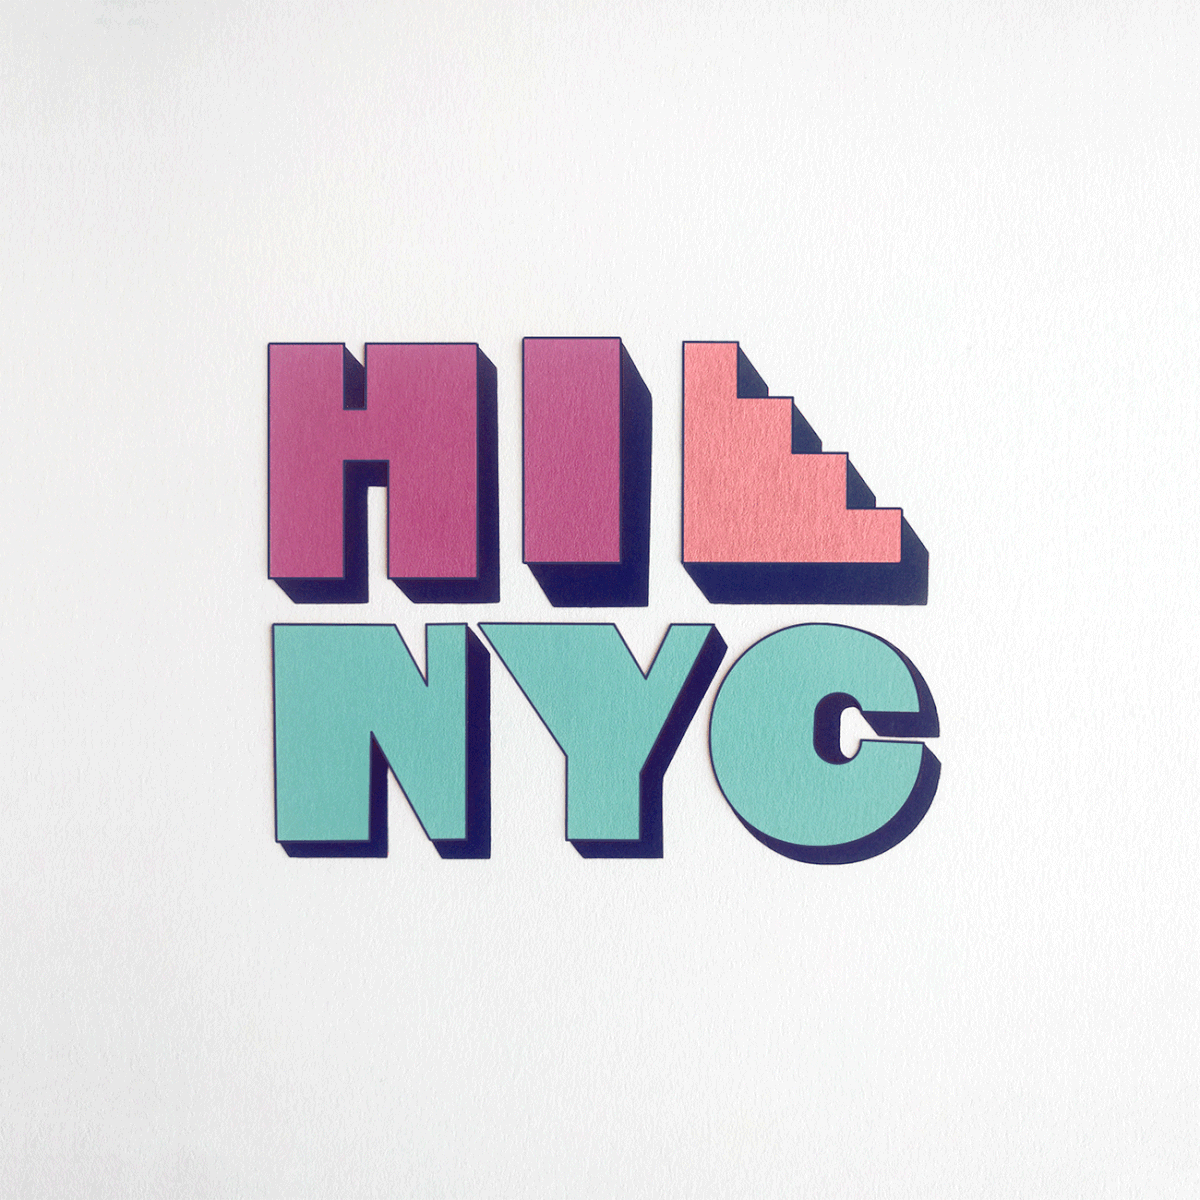 ILLUSTRATION  nyc typography   papercraft handmade tactile editorial graphic design  paper